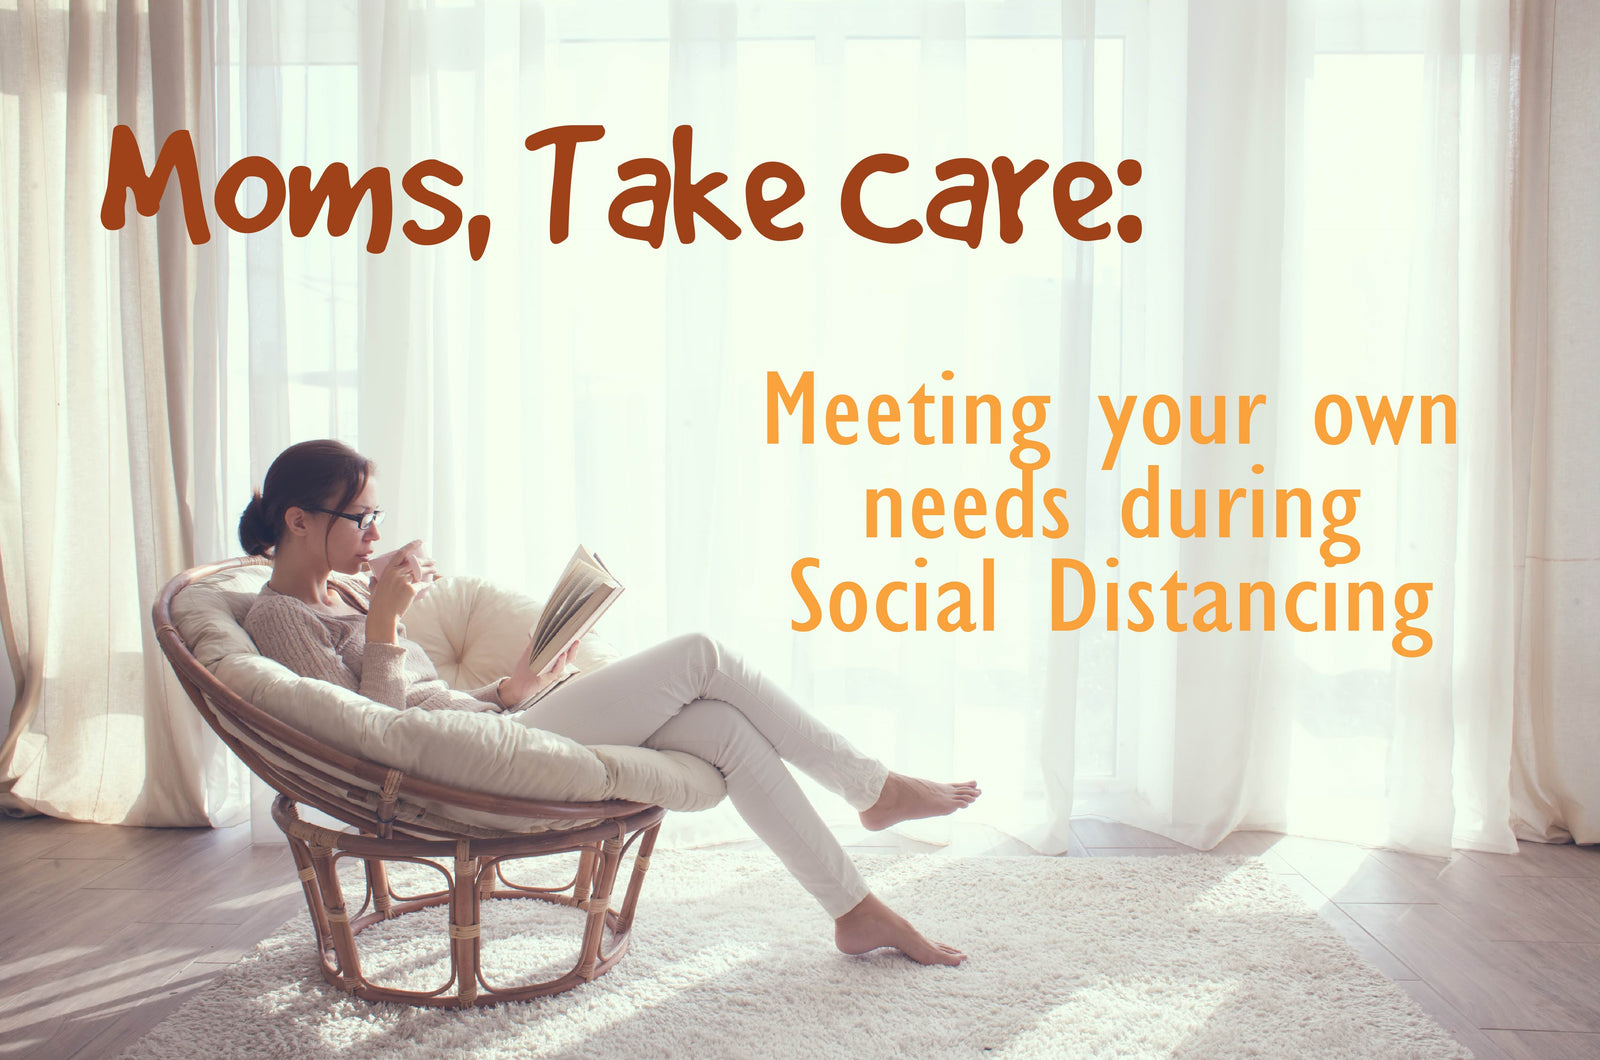 Mom relaxes using self care during social distancing